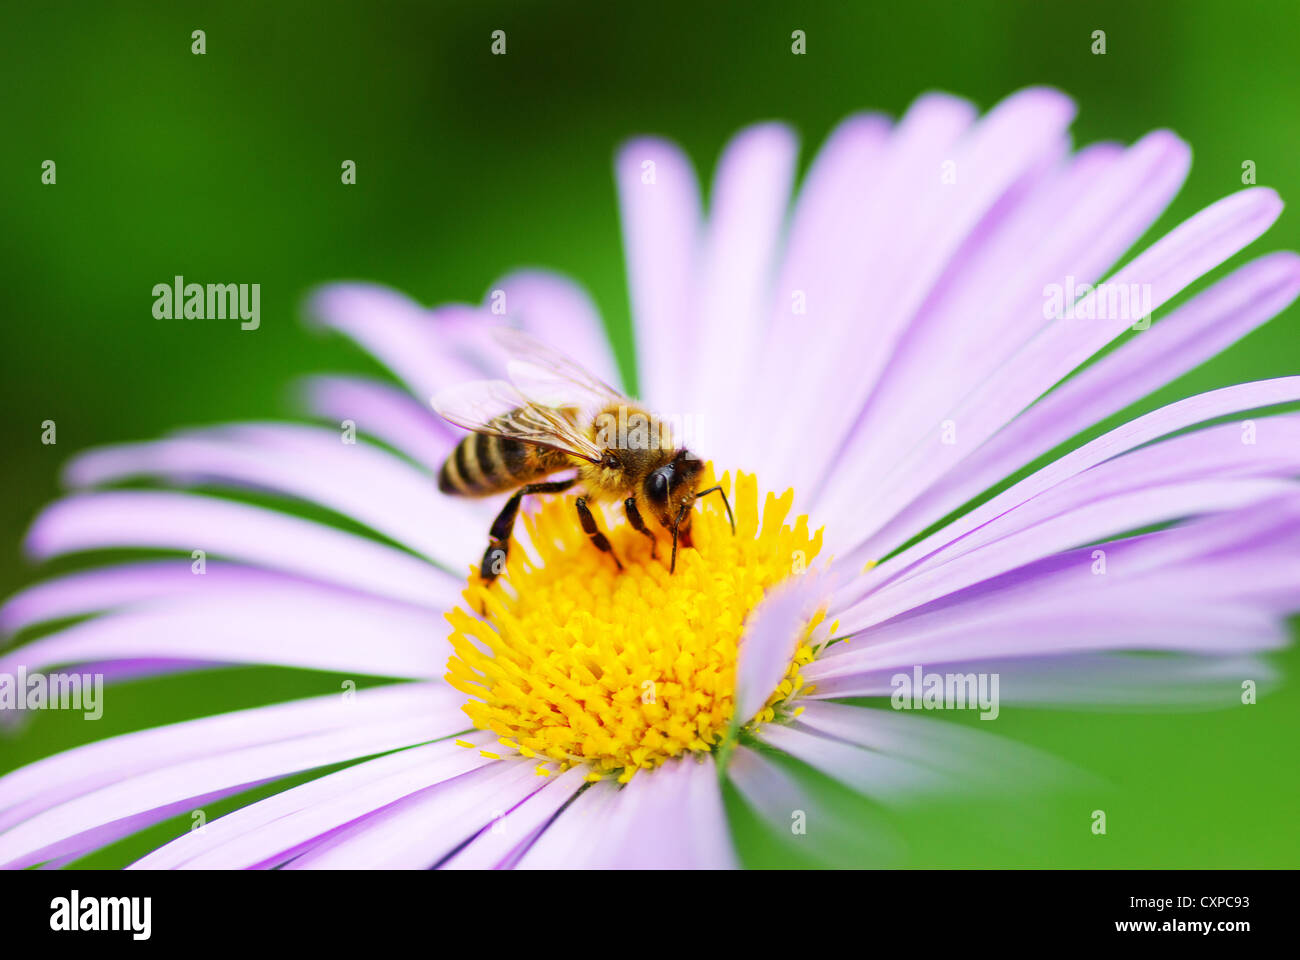 Image of beautiful violet flower and bee Stock Photo